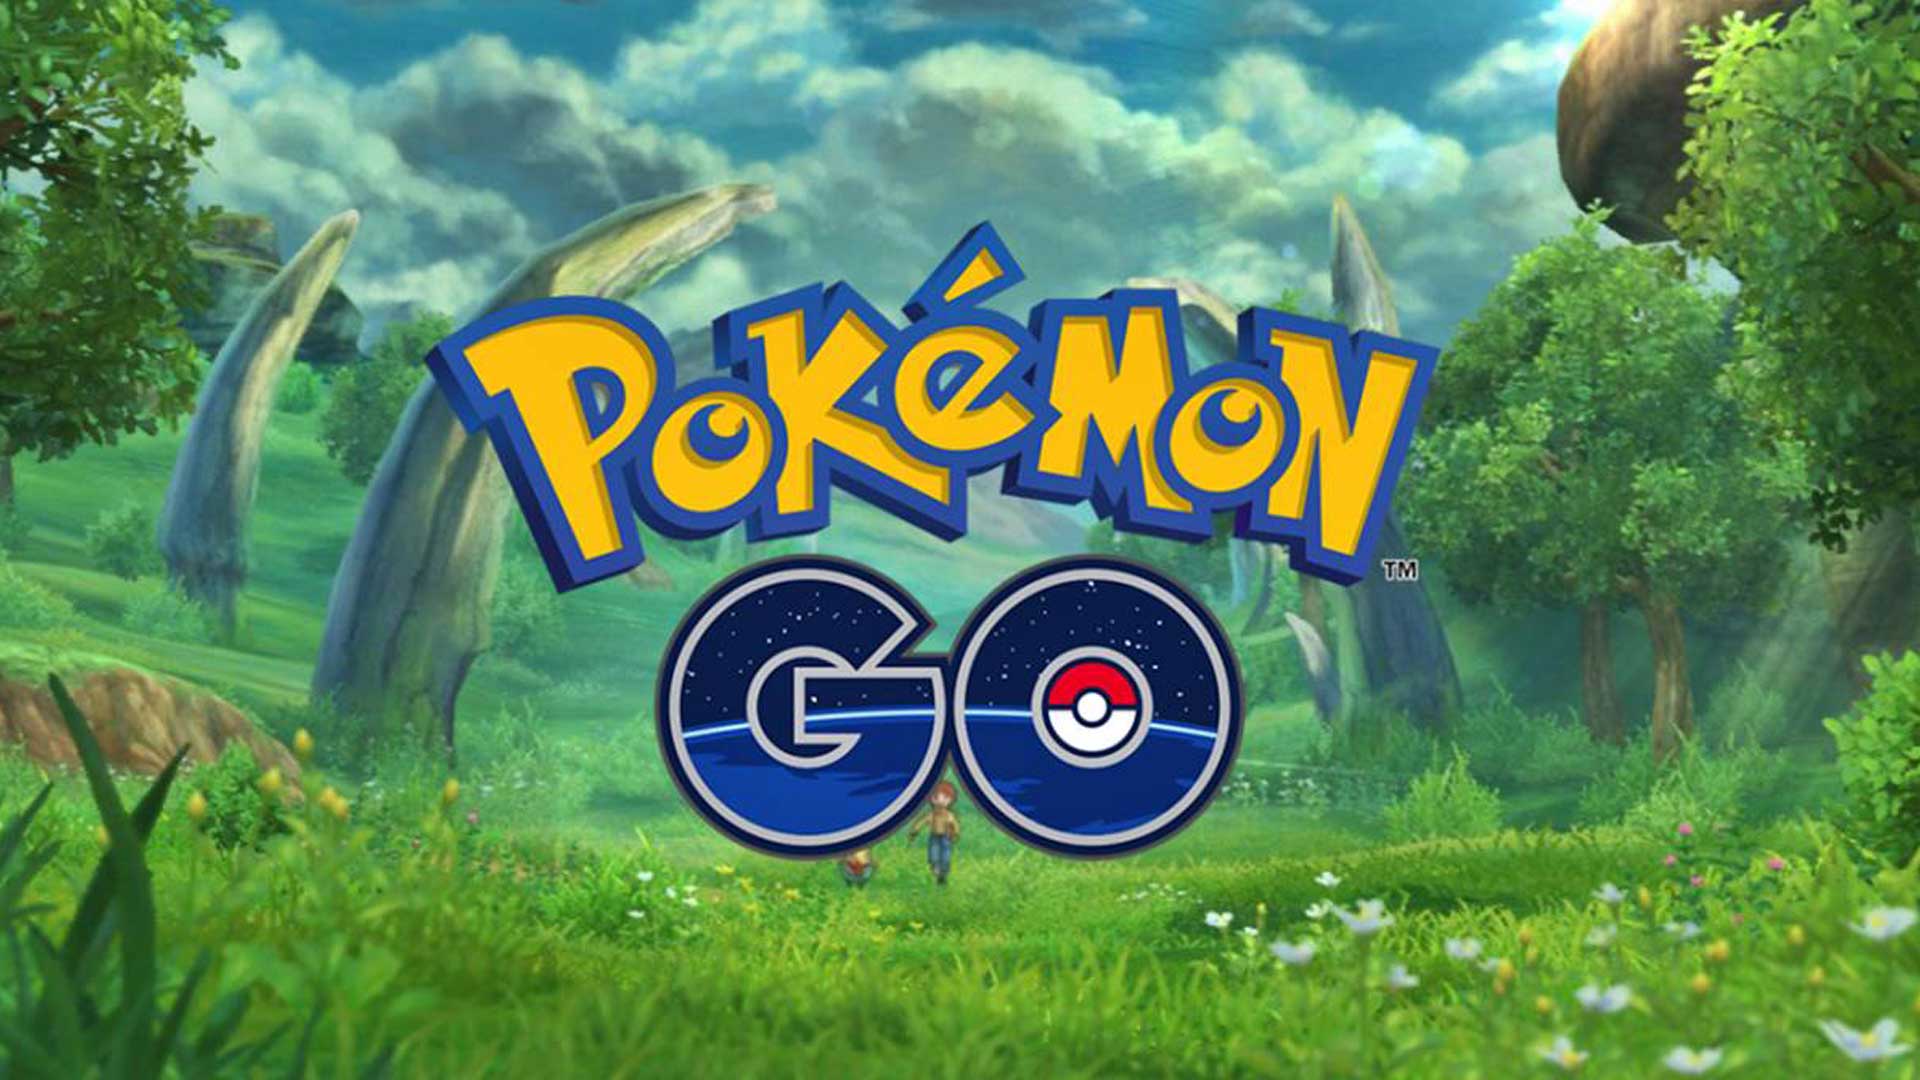 Video Game Pokémon GO HD Wallpaper by DrBoxHead